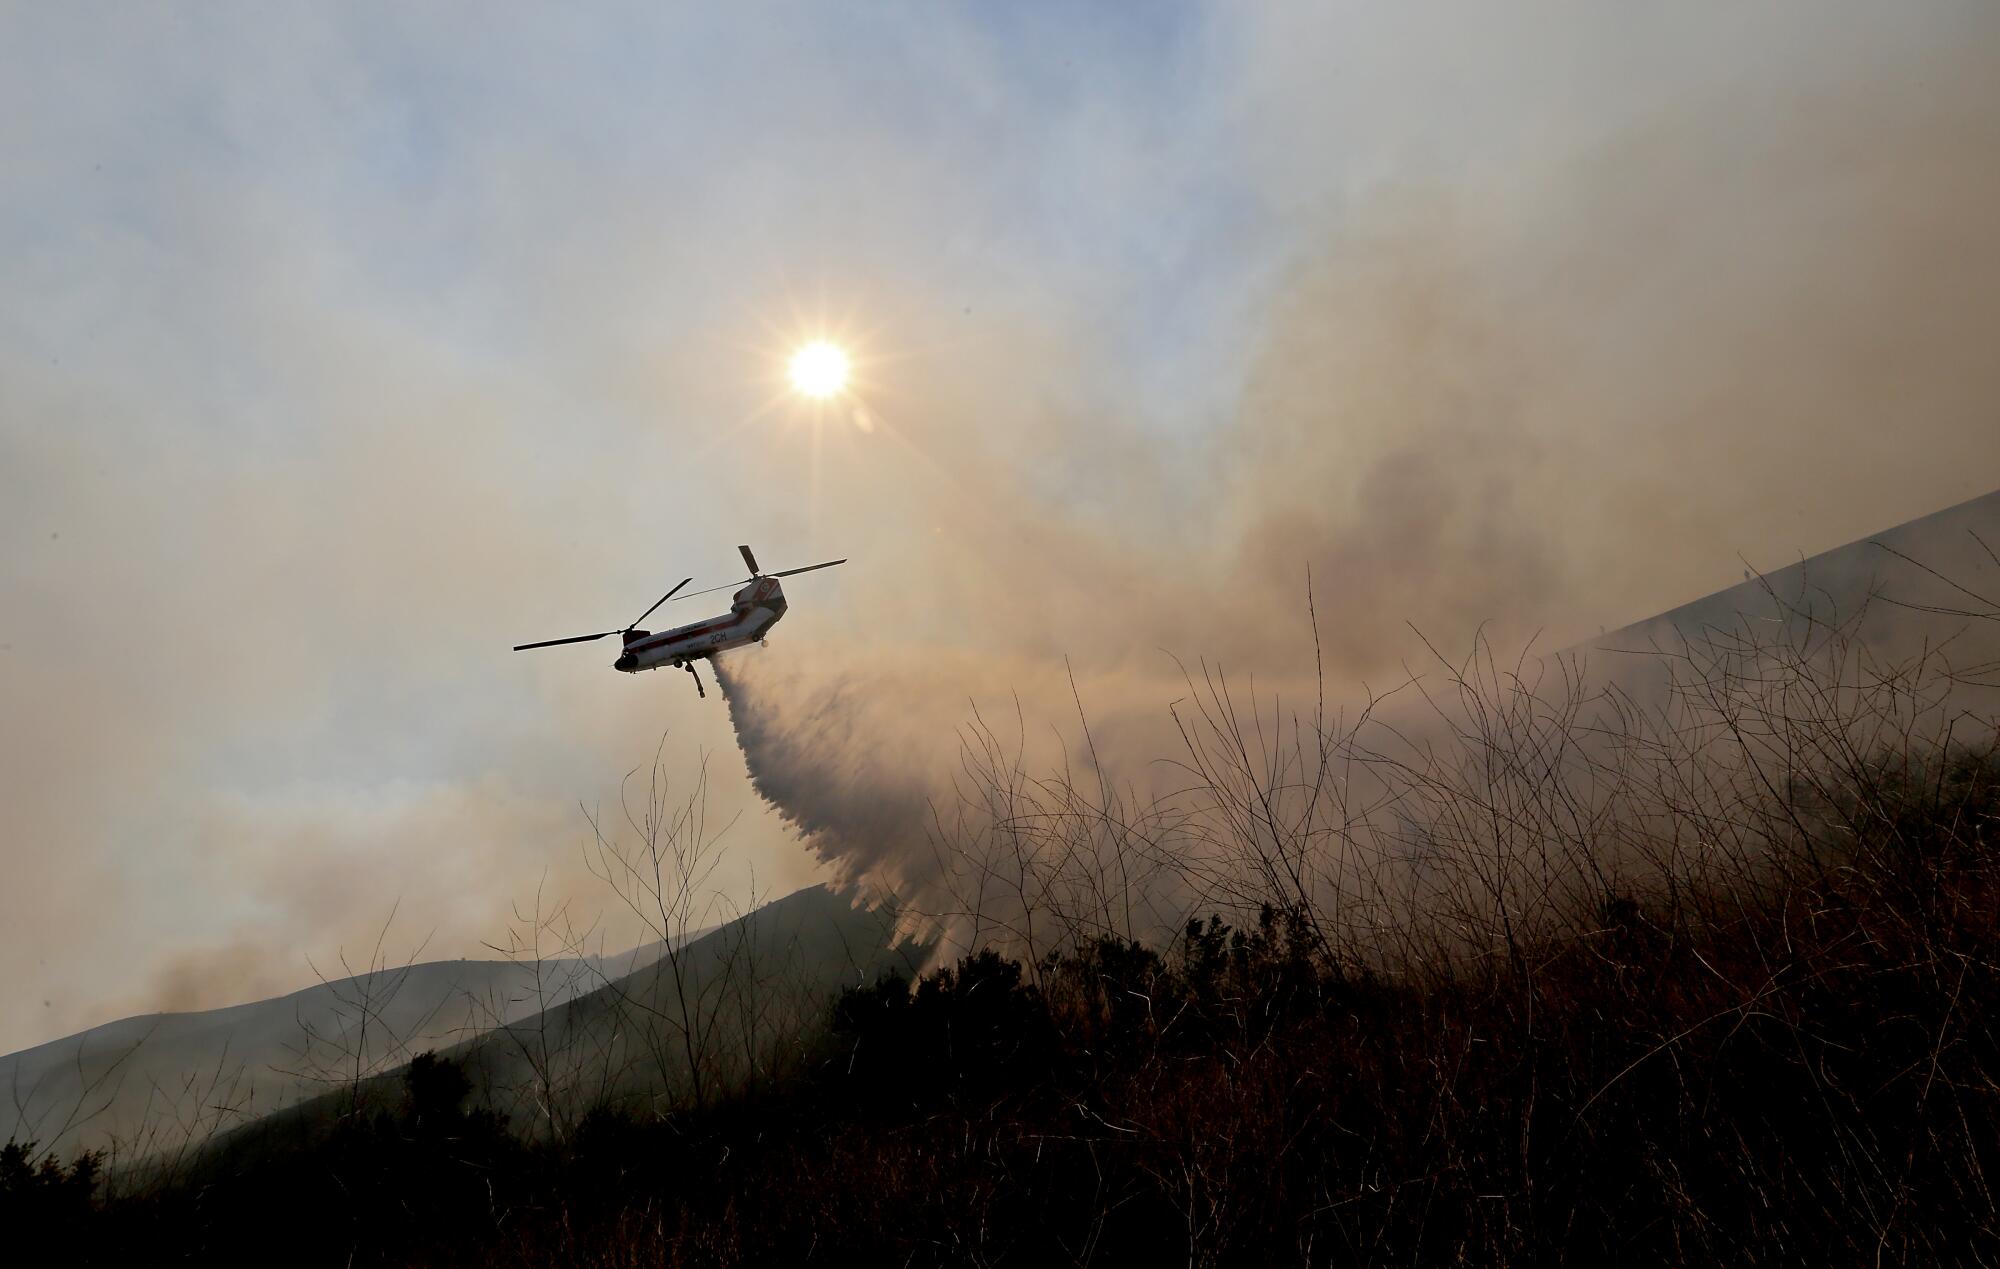 A helicopter drops water amid smoke